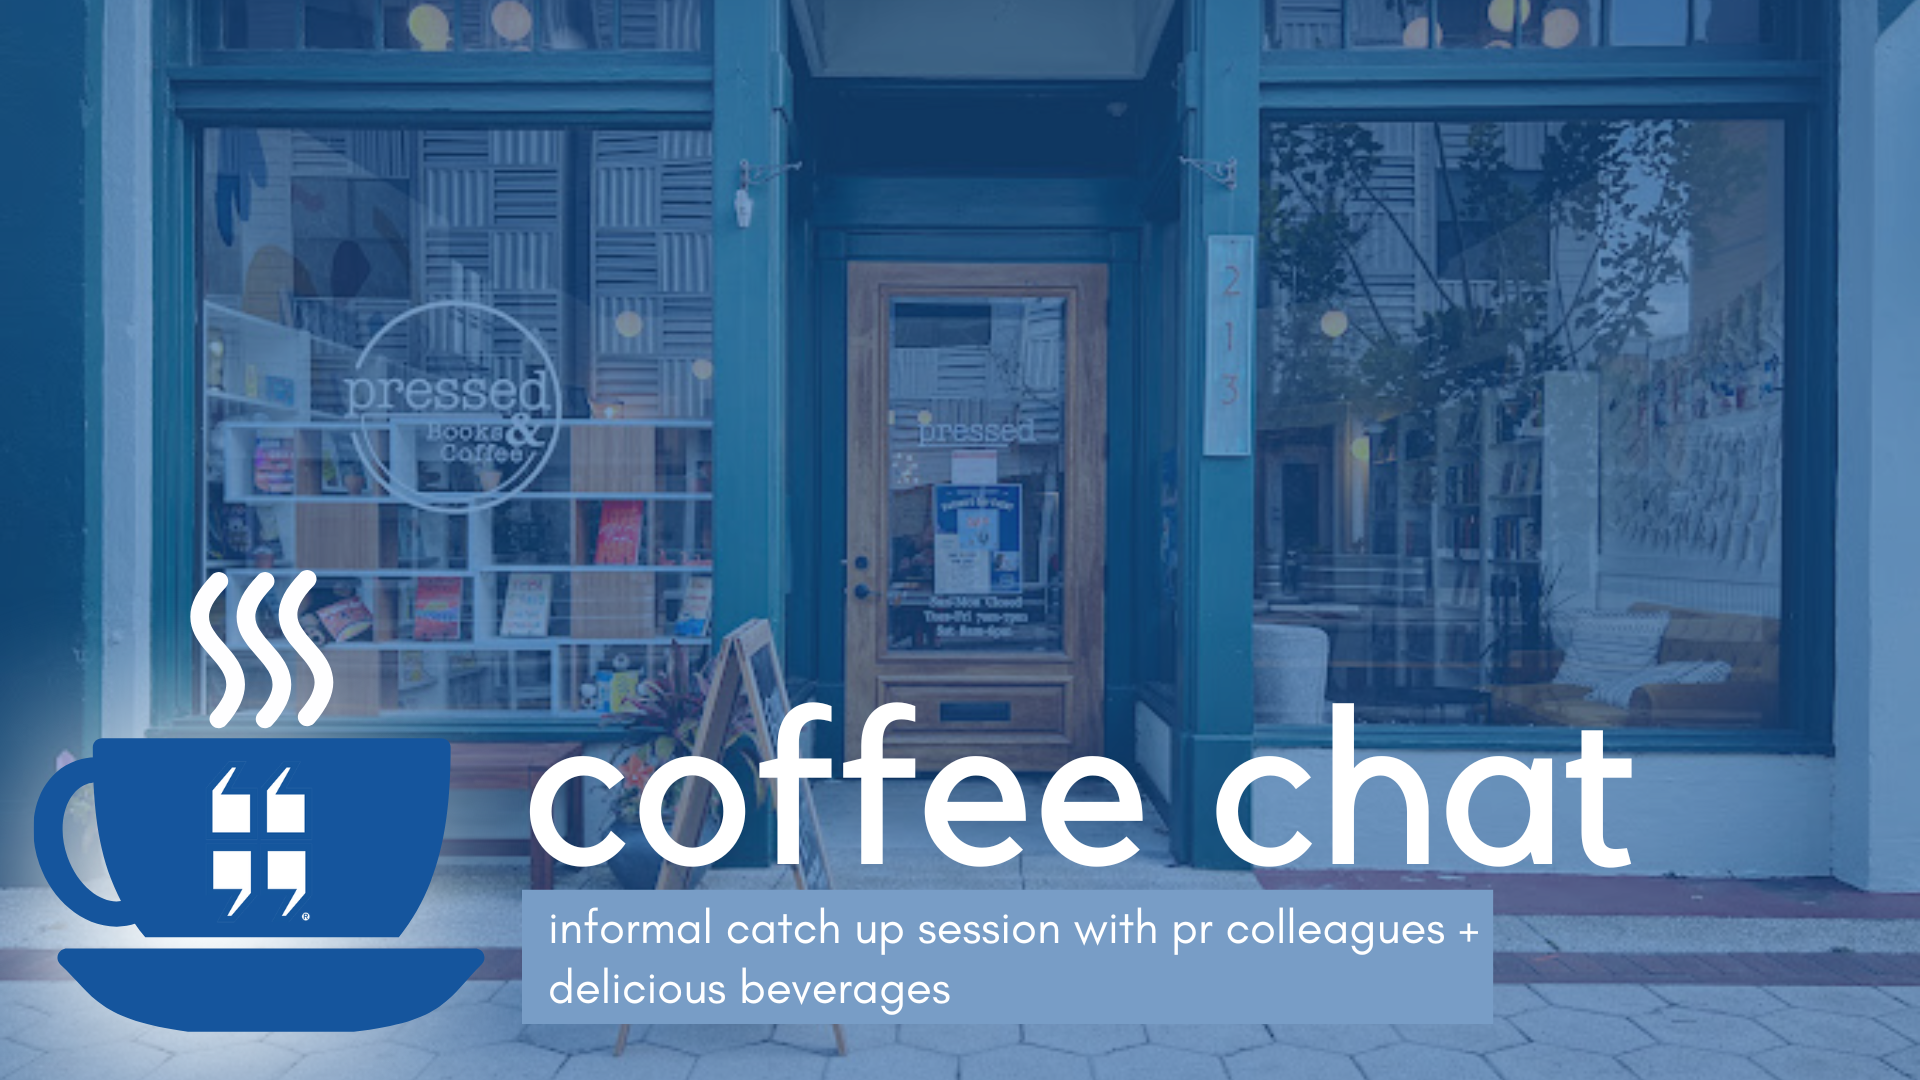 Coffee chat event banner image